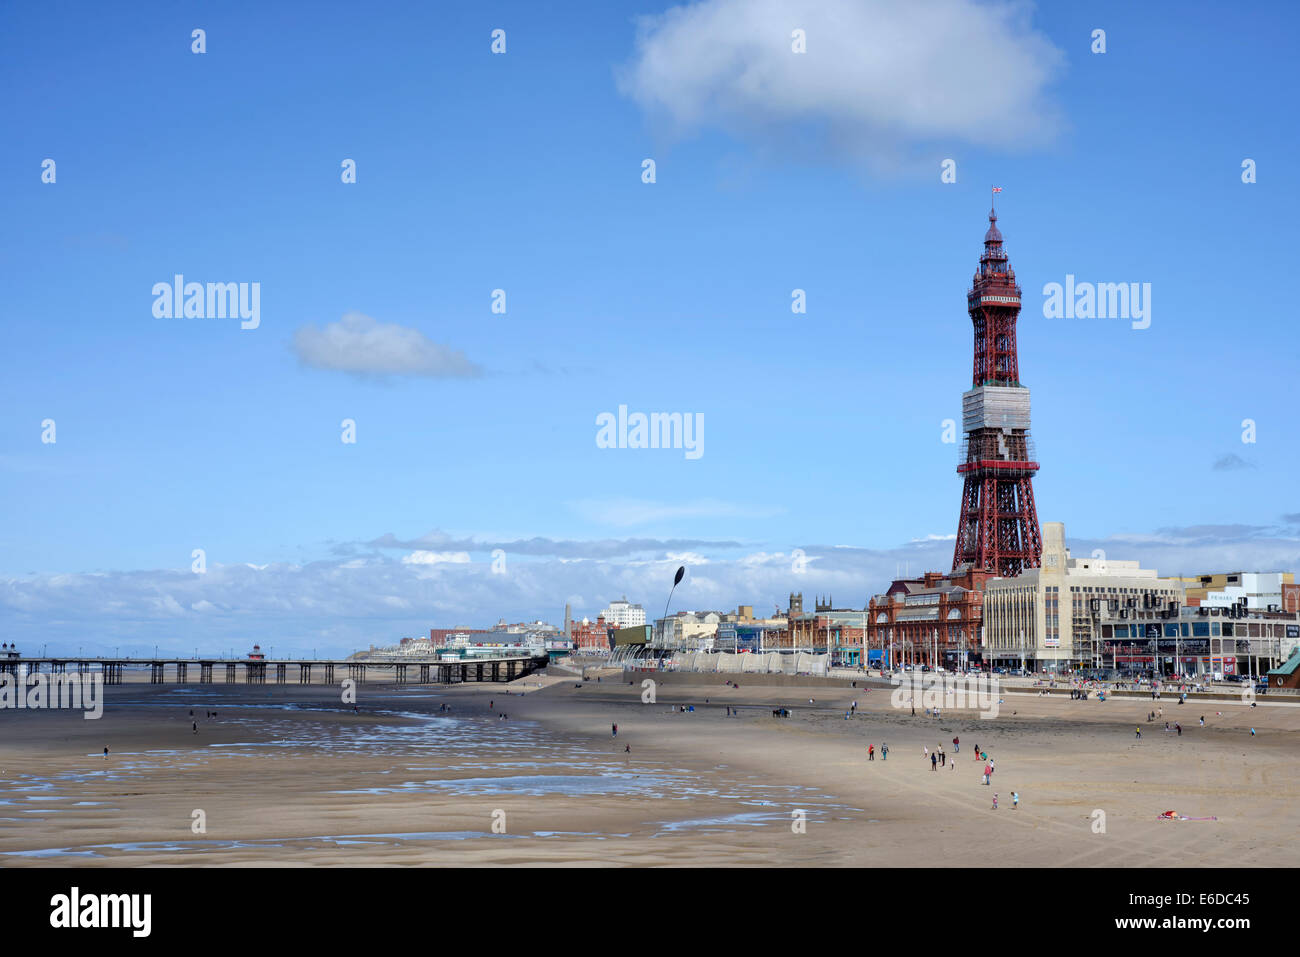 Blackpool Tower in Lancashire, England viewed across the sandy beach from Central Pier Stock Photo